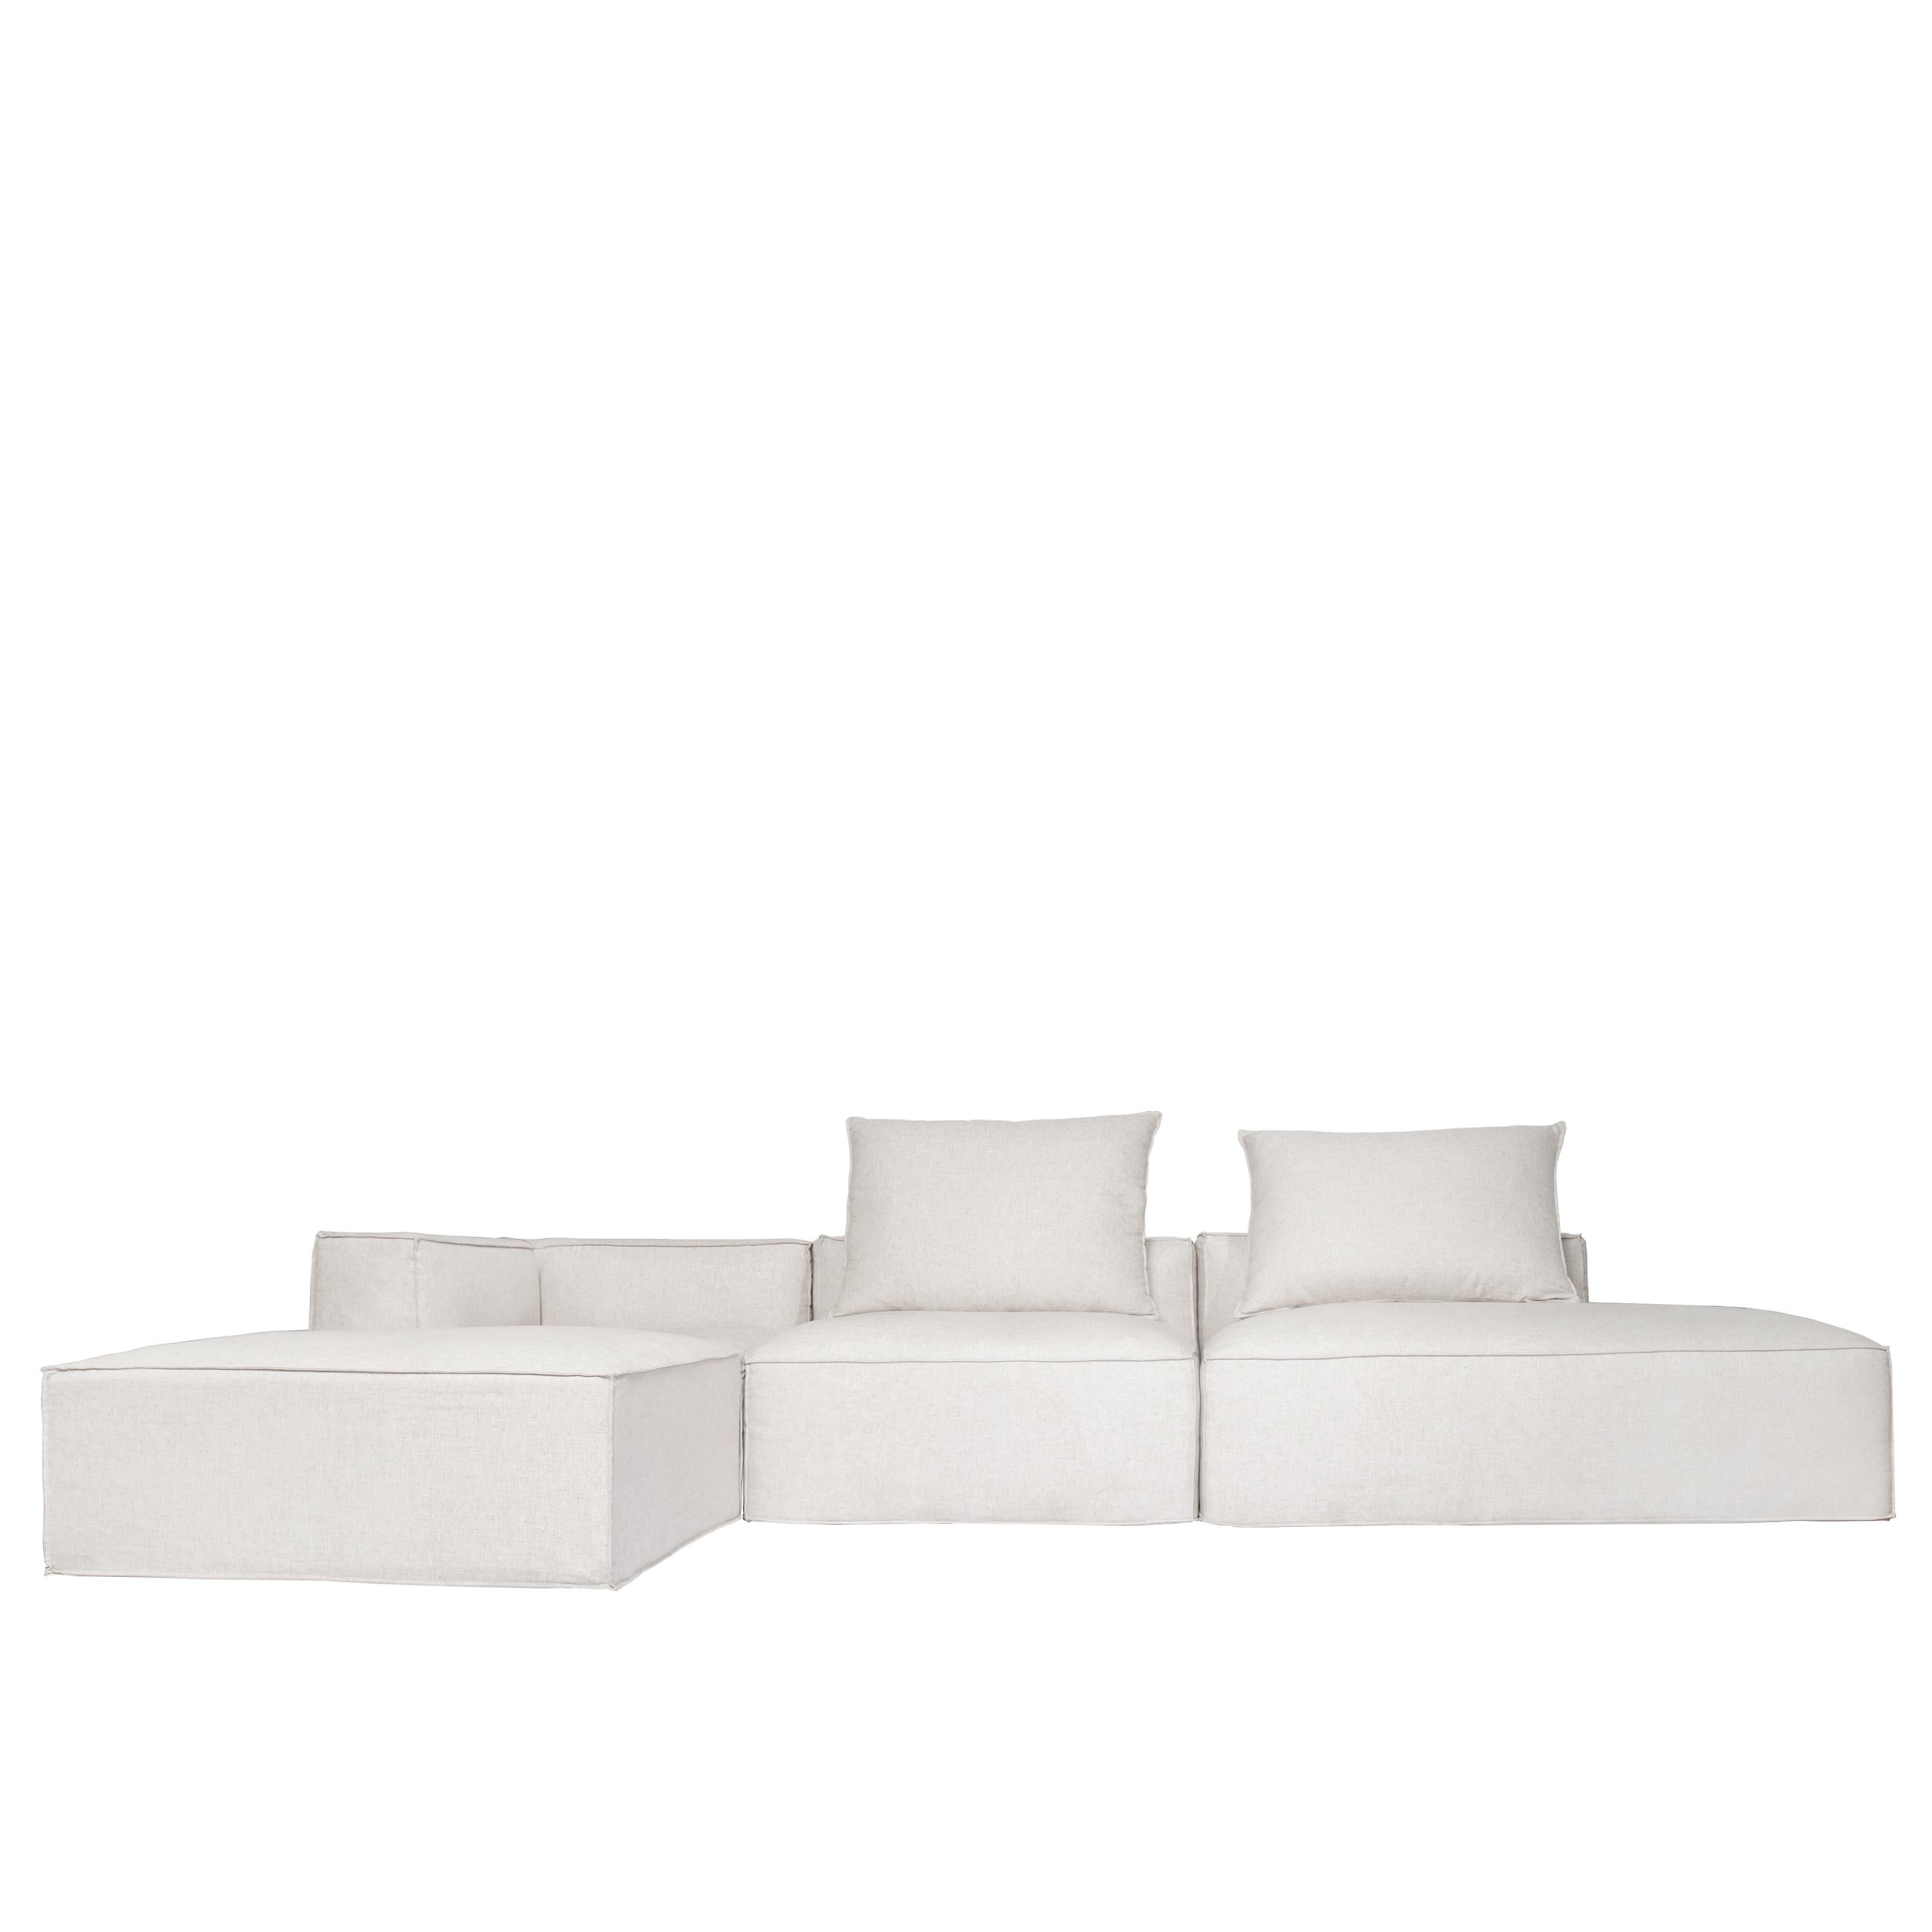 Originally design for a getaway home the Arena Sofa is ultra-comfortable as it is practical for everyday family life. A geometric, still soft body covered in relaxed removable covers that make it an exceptional lounge piece. The sectional is